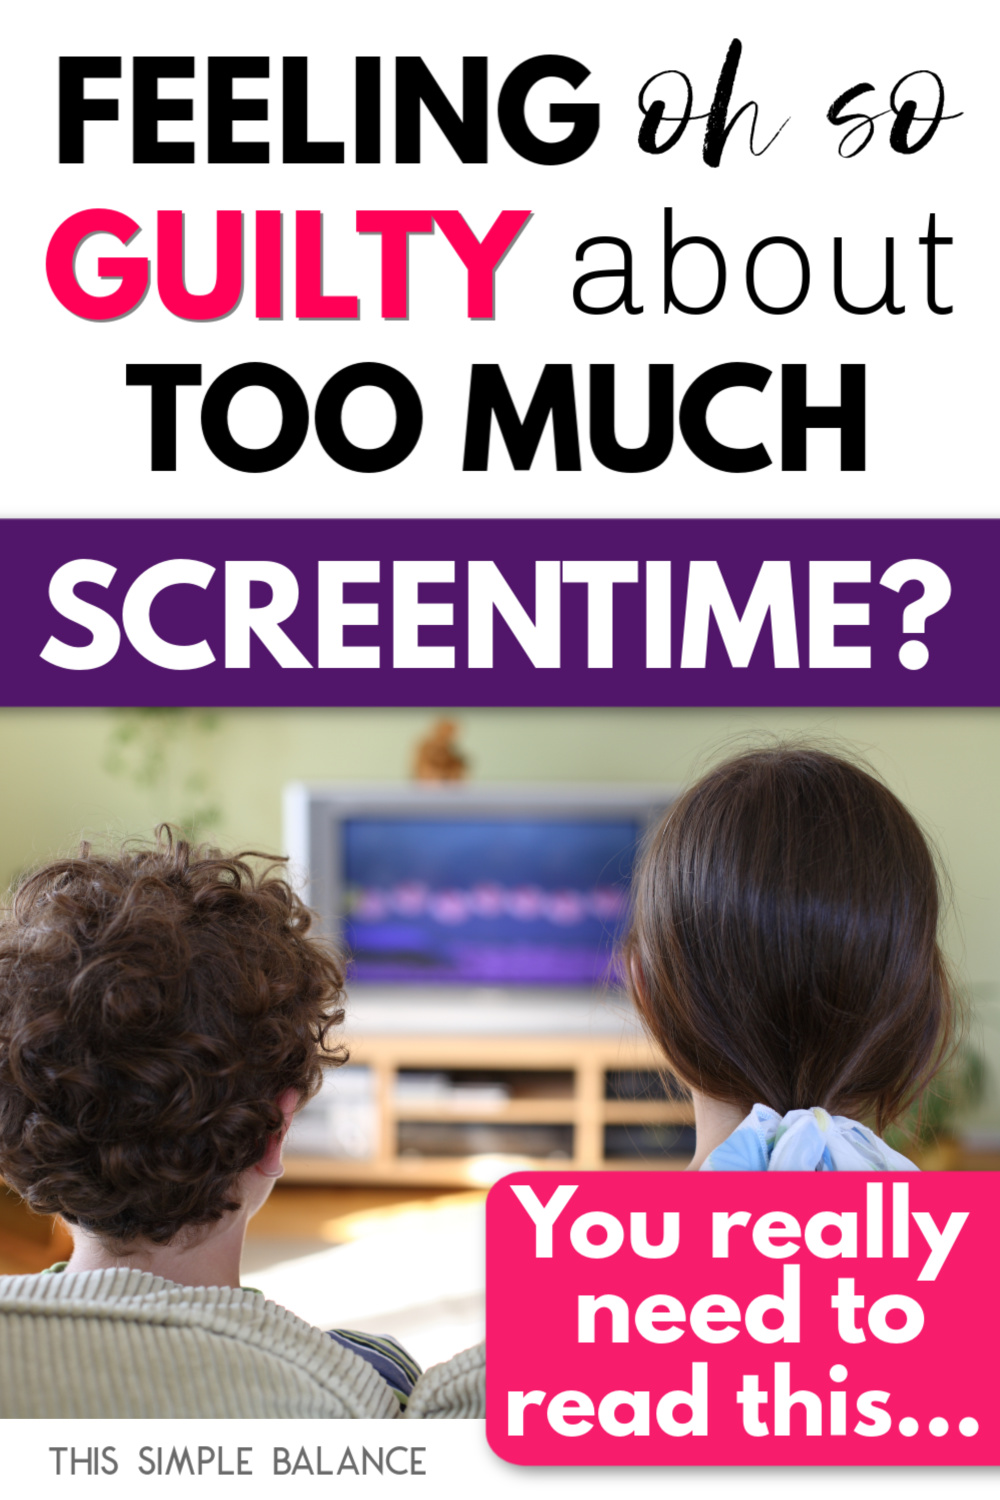 Two kids watching t.v., with text overlay, "feeling oh so guilty about too much screentime? You really need to read this..."